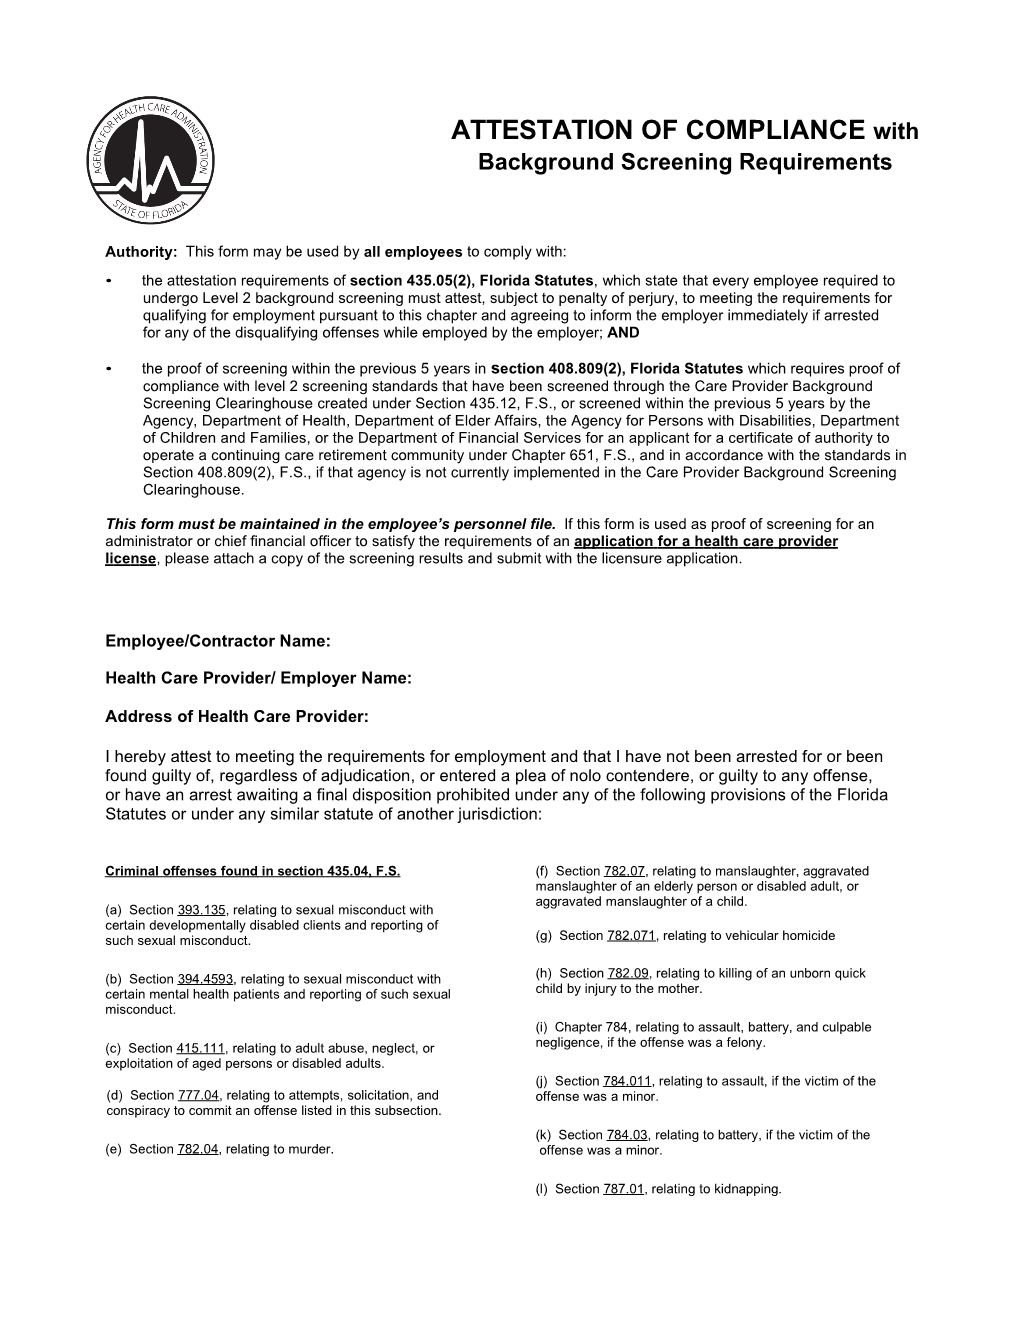 Affidavit of Compliance with Background Screening Requirements